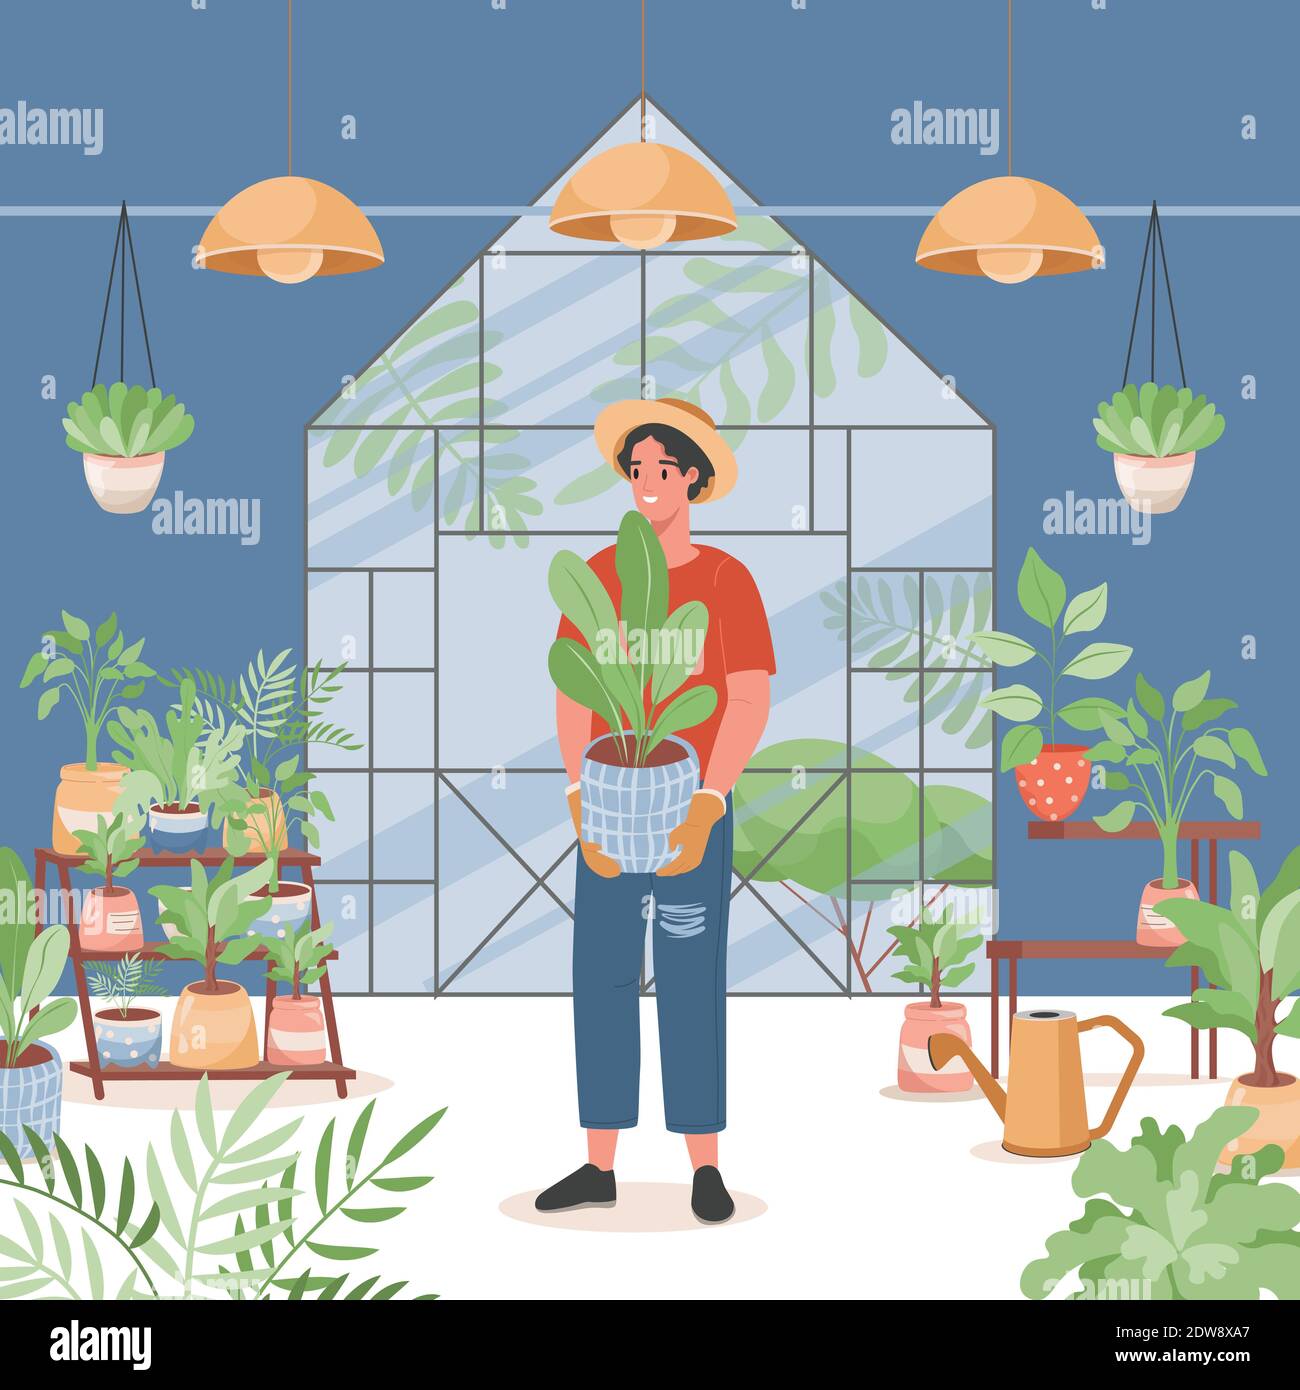 Flower shop interior vector flat design. Happy smiling man in casual clothes holding pot and selling plants. Shelves with green home plants, watering can. Agriculture gardener hobby, garden shop. Stock Vector